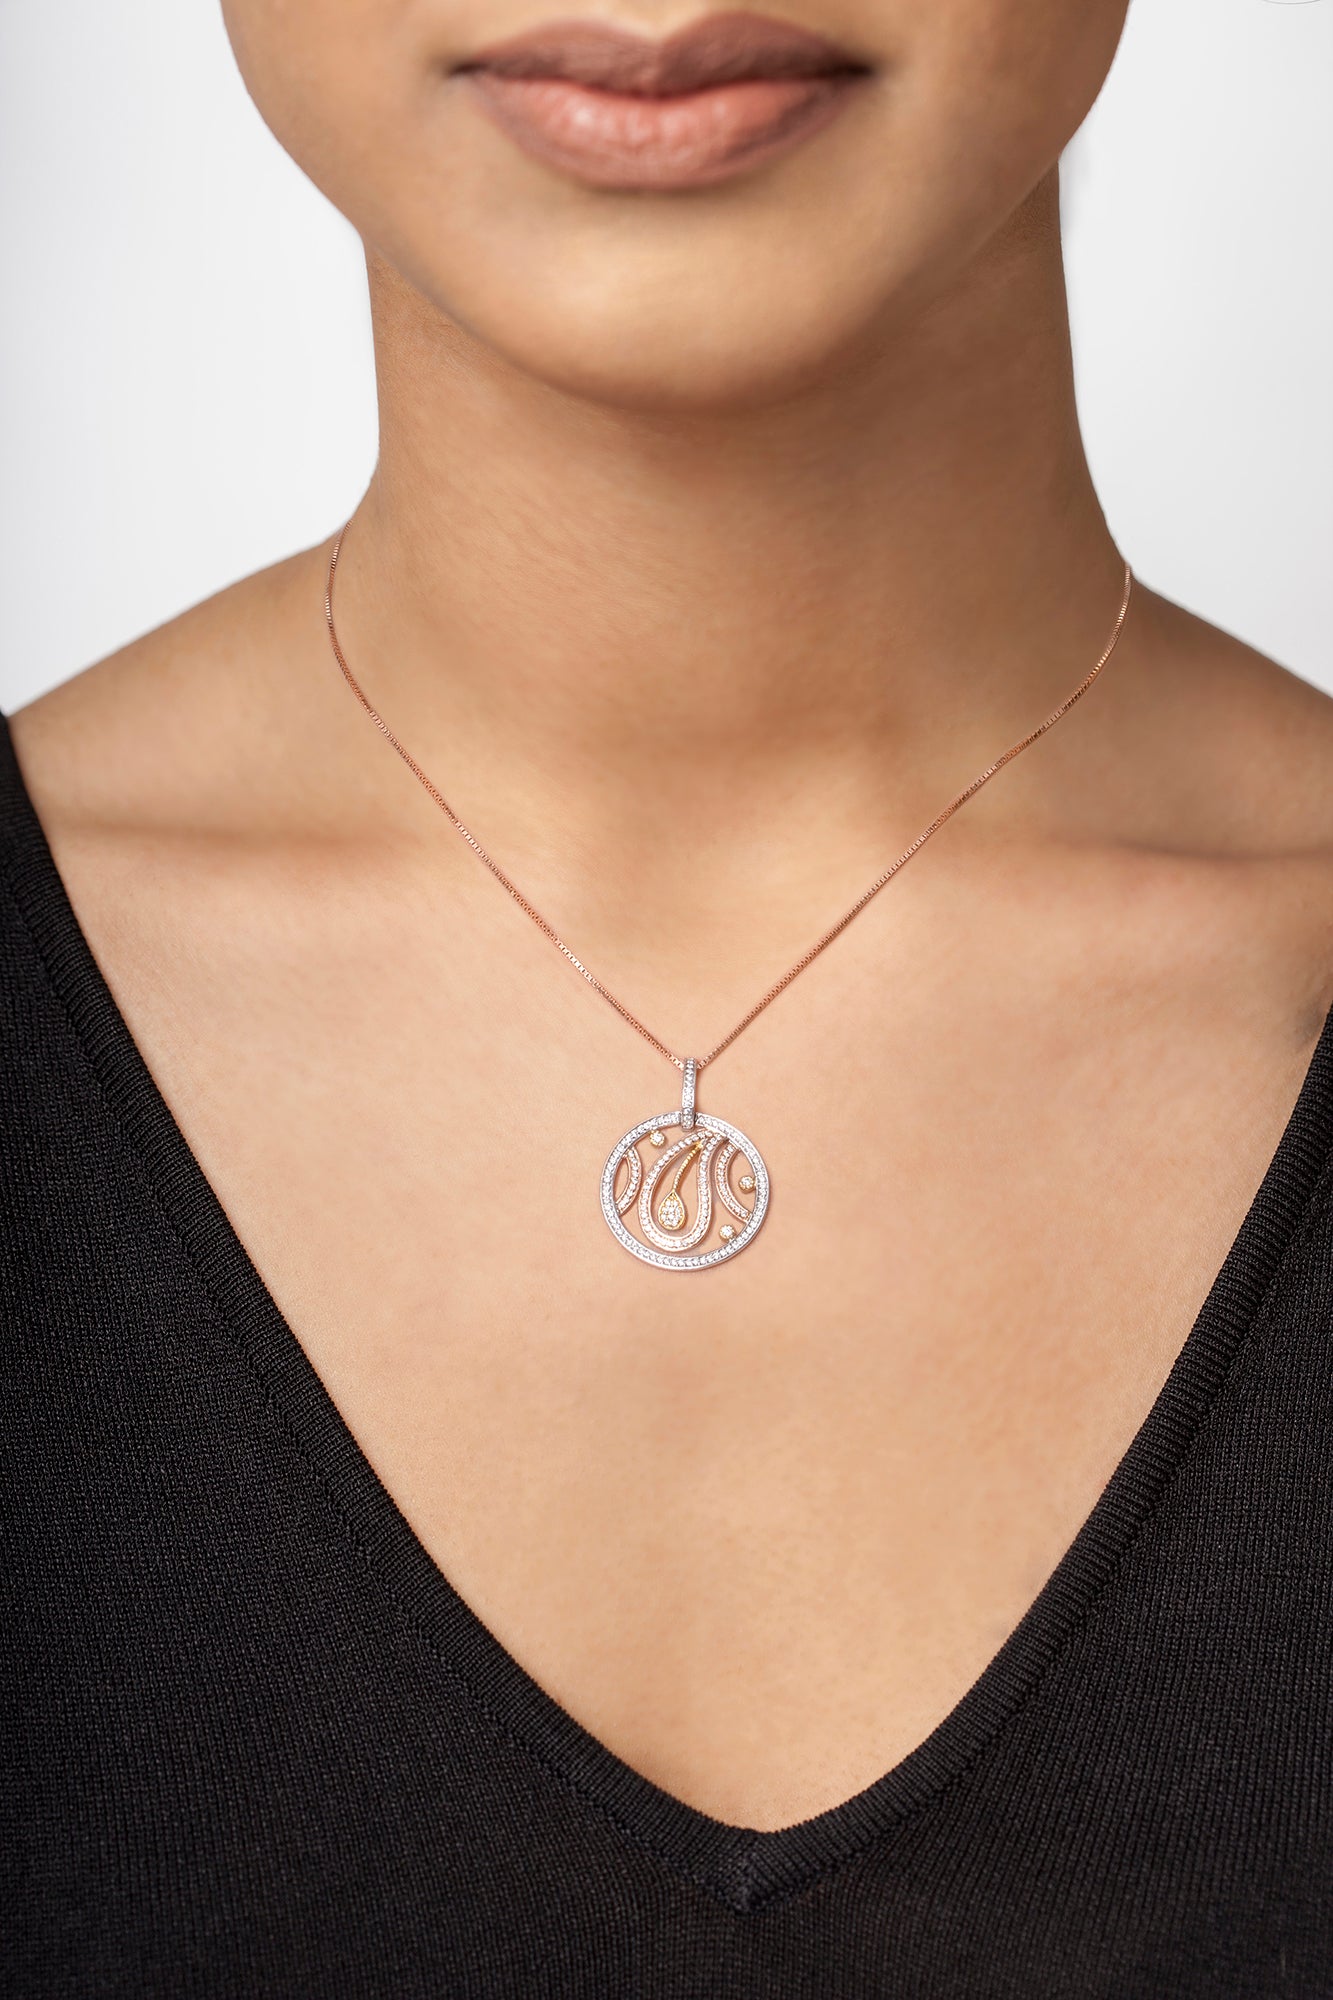 The Intricate Circle Necklace- 60% OFF!